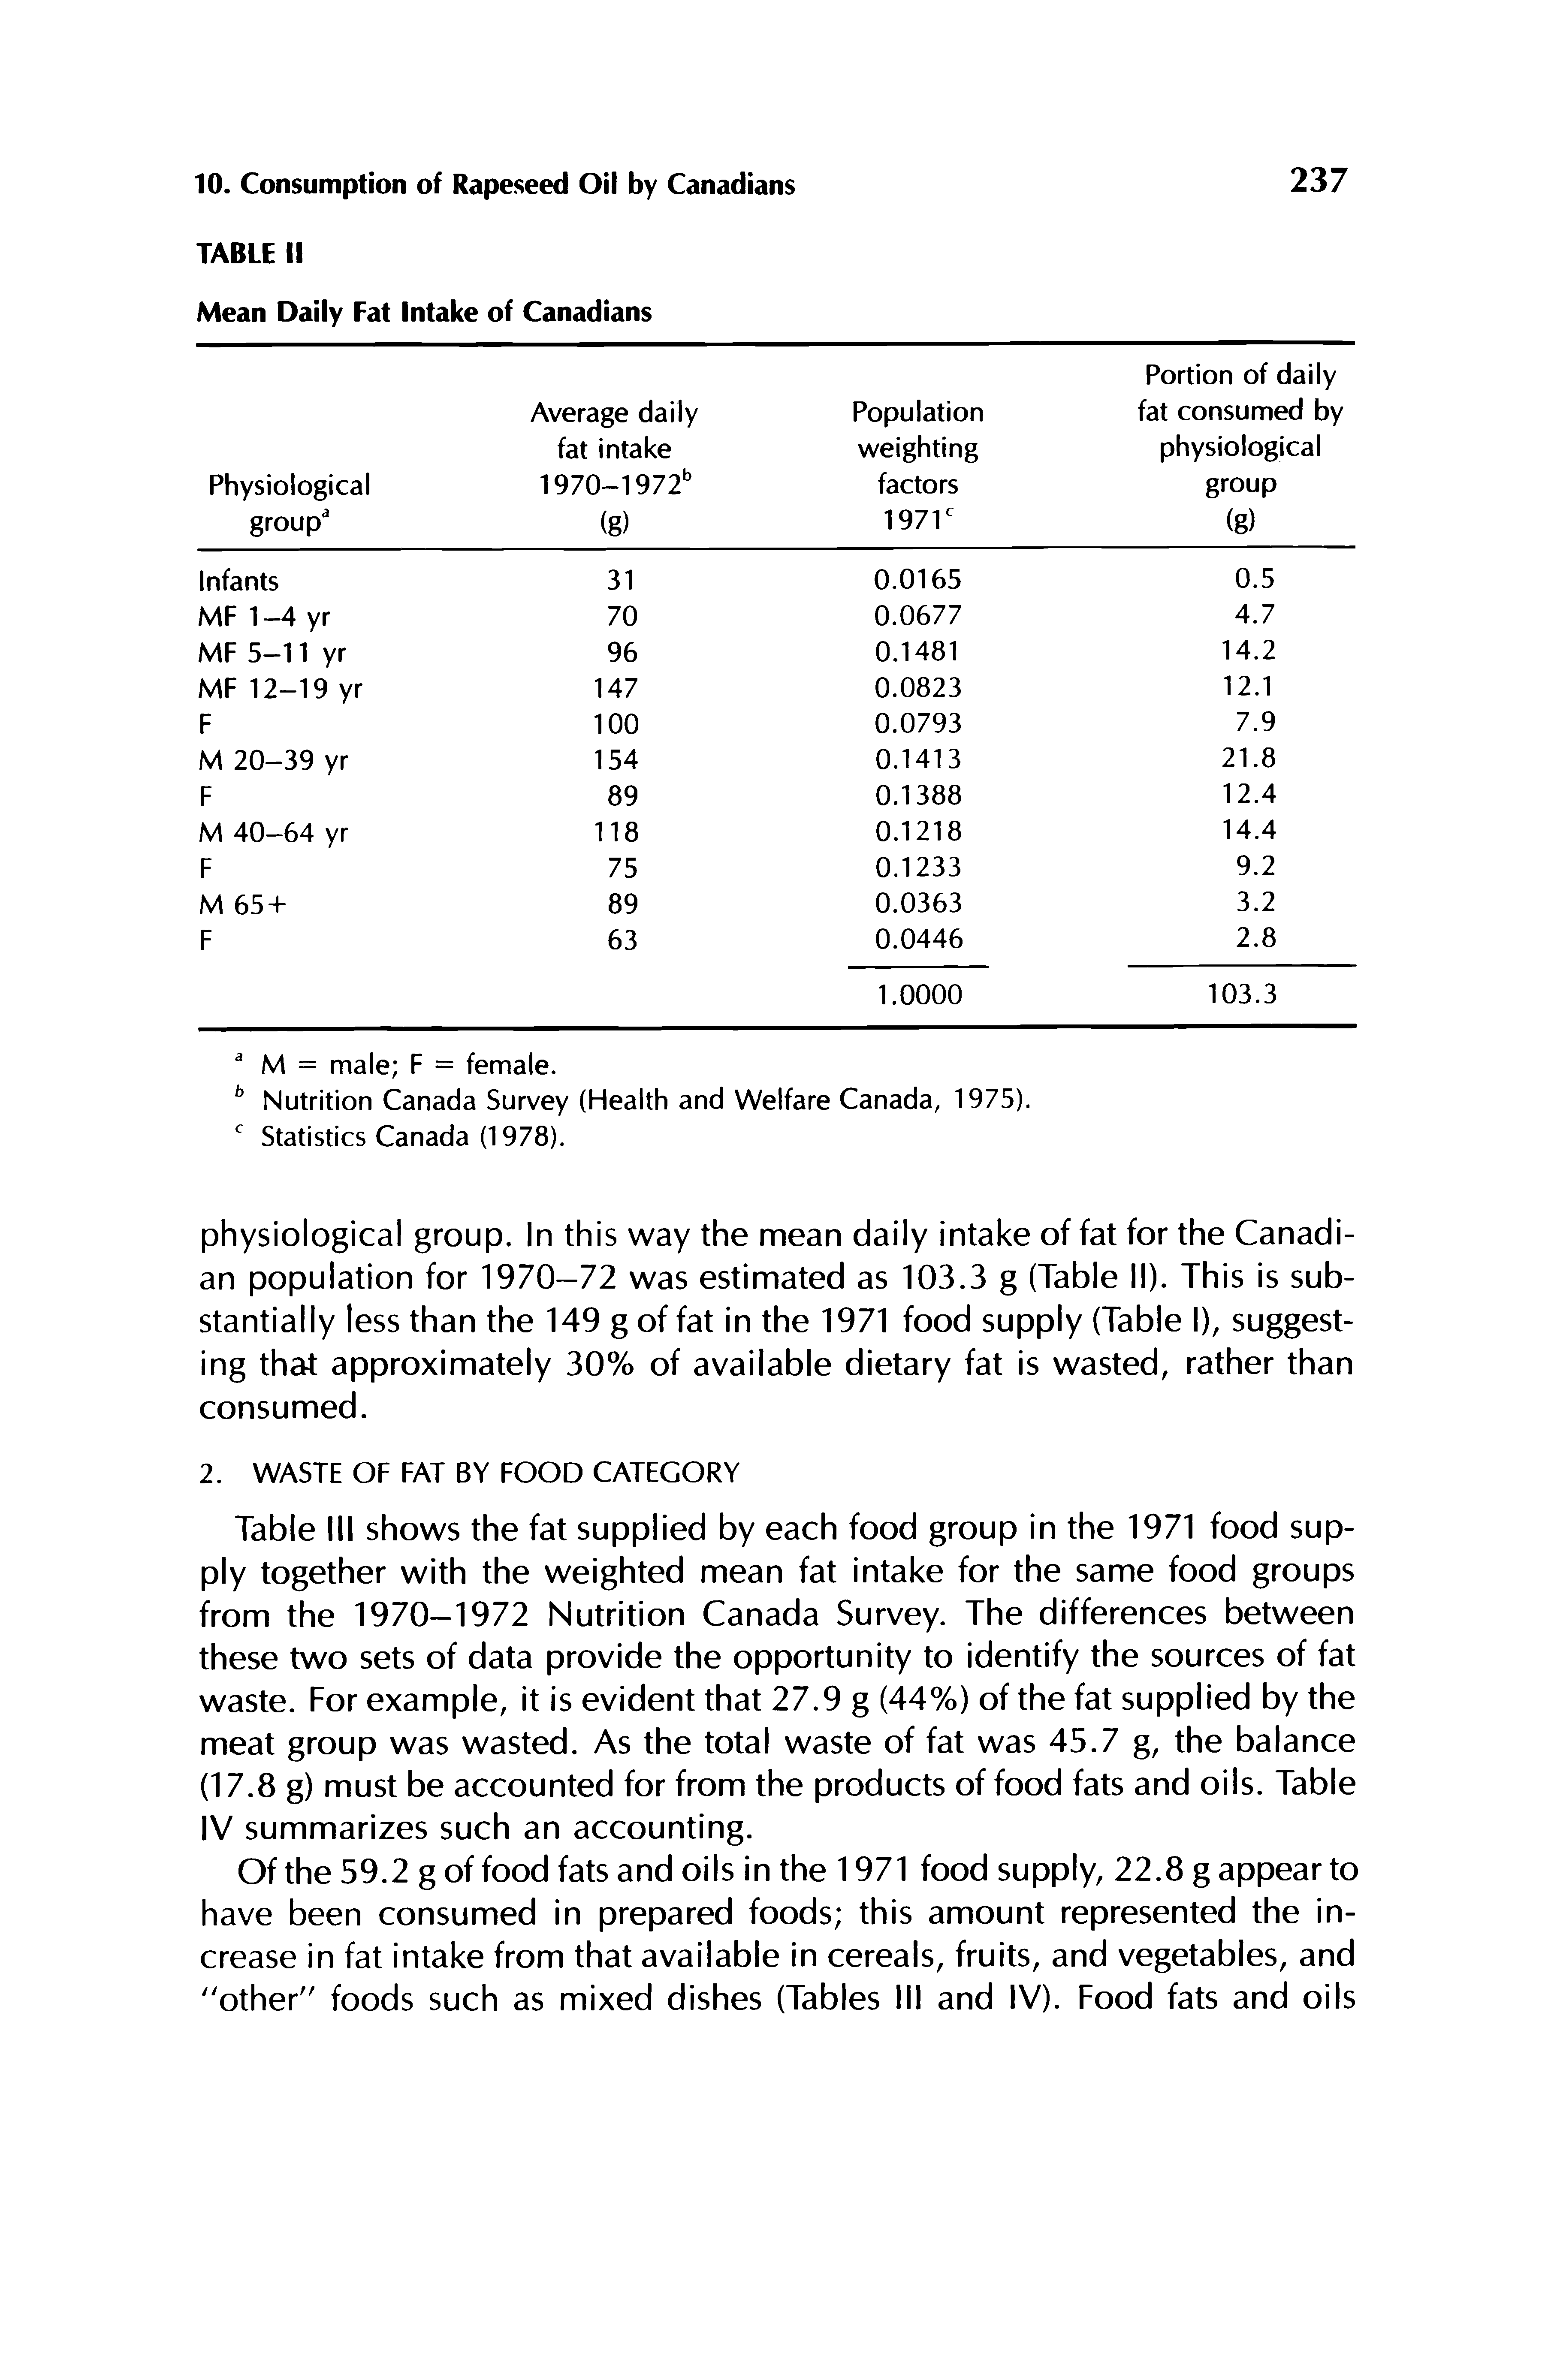 Table III shows the fat supplied by each food group in the 1971 food supply together with the weighted mean fat intake for the same food groups from the 1970-1972 Nutrition Canada Survey. The differences between these two sets of data provide the opportunity to identify the sources of fat waste. For example, it is evident that 27.9 g (44%) of the fat supplied by the meat group was wasted. As the total waste of fat was 45.7 g, the balance (17.8 g) must be accounted for from the products of food fats and oils. Table IV summarizes such an accounting.